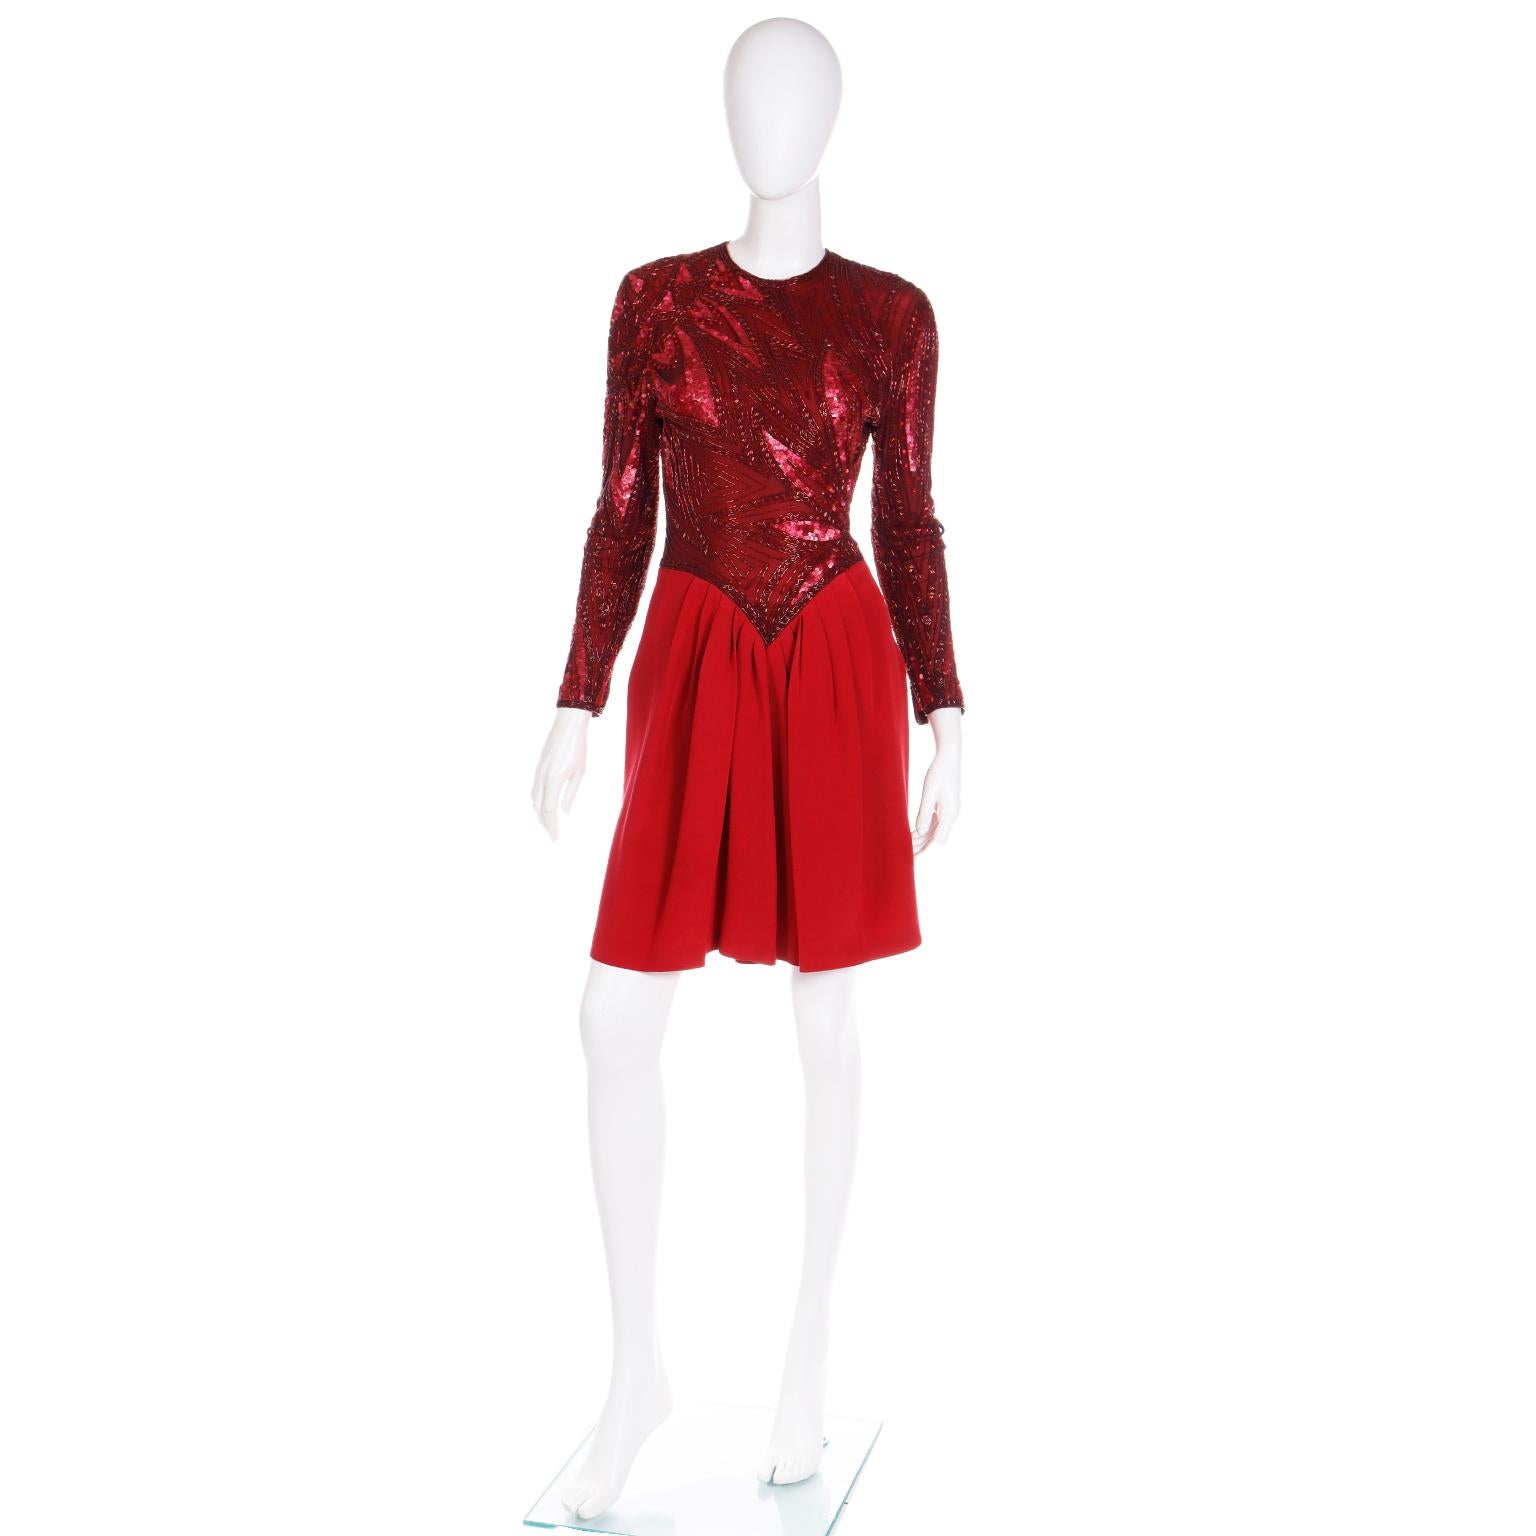 This incredible vintage 1980's Bob Mackie Boutique vintage evening dress is such a good example of Mackie's attention to detail in his designs. The dress has a solid red silk crepe skirt and the bodice is mesh over crepe that is finely beaded with